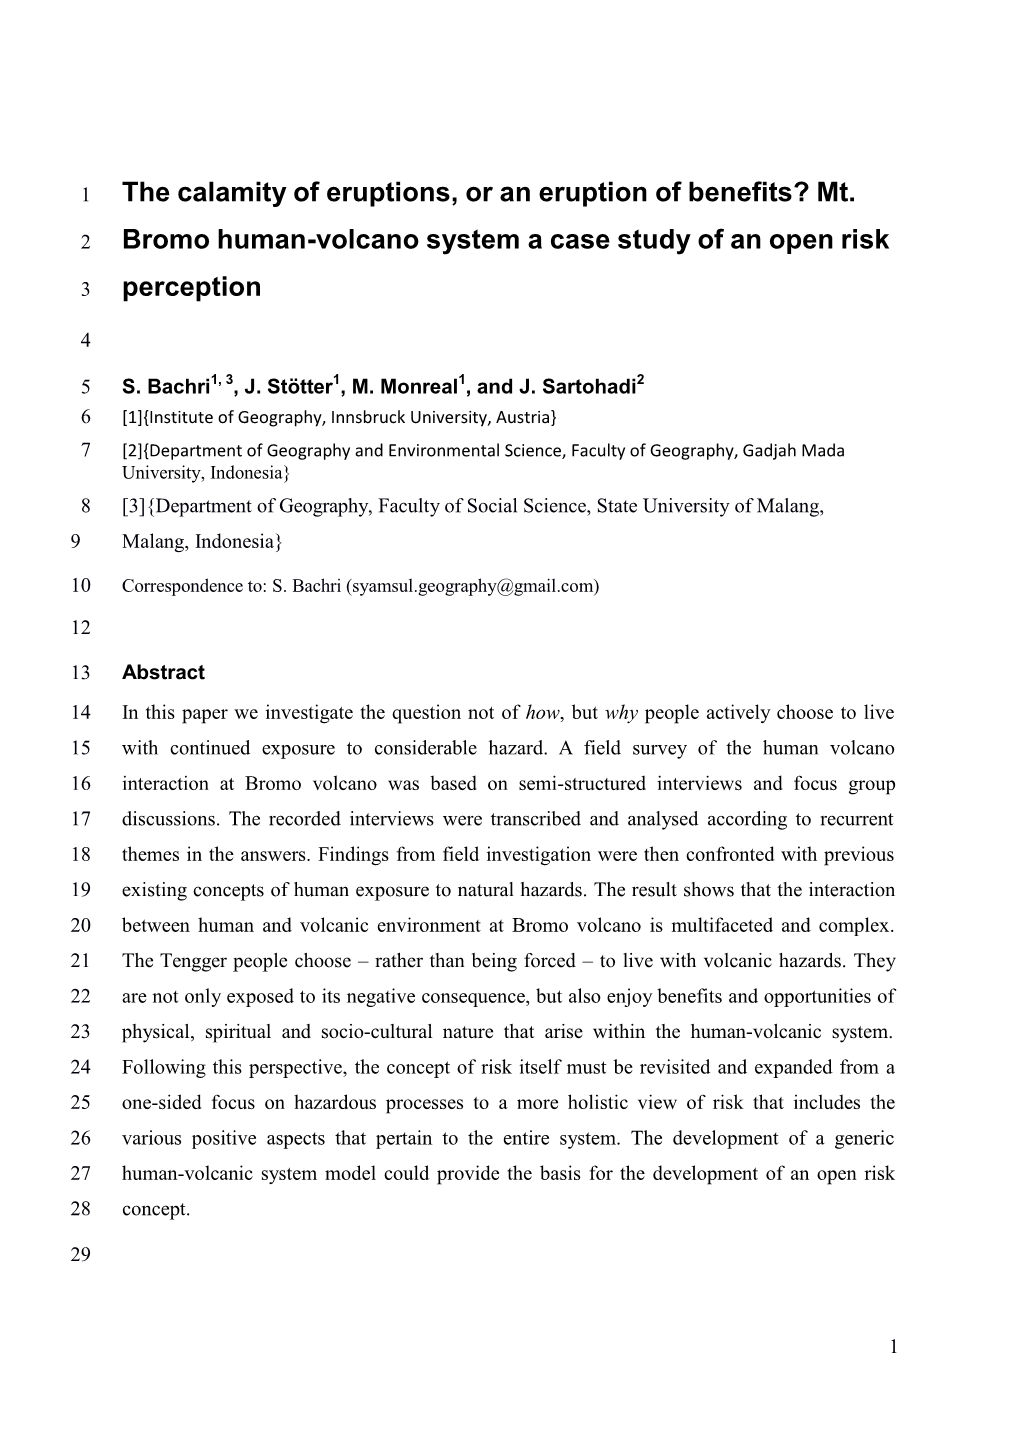 Mt. 2 Bromo Human-Volcano System a Case Study of an Open Risk 3 Percept